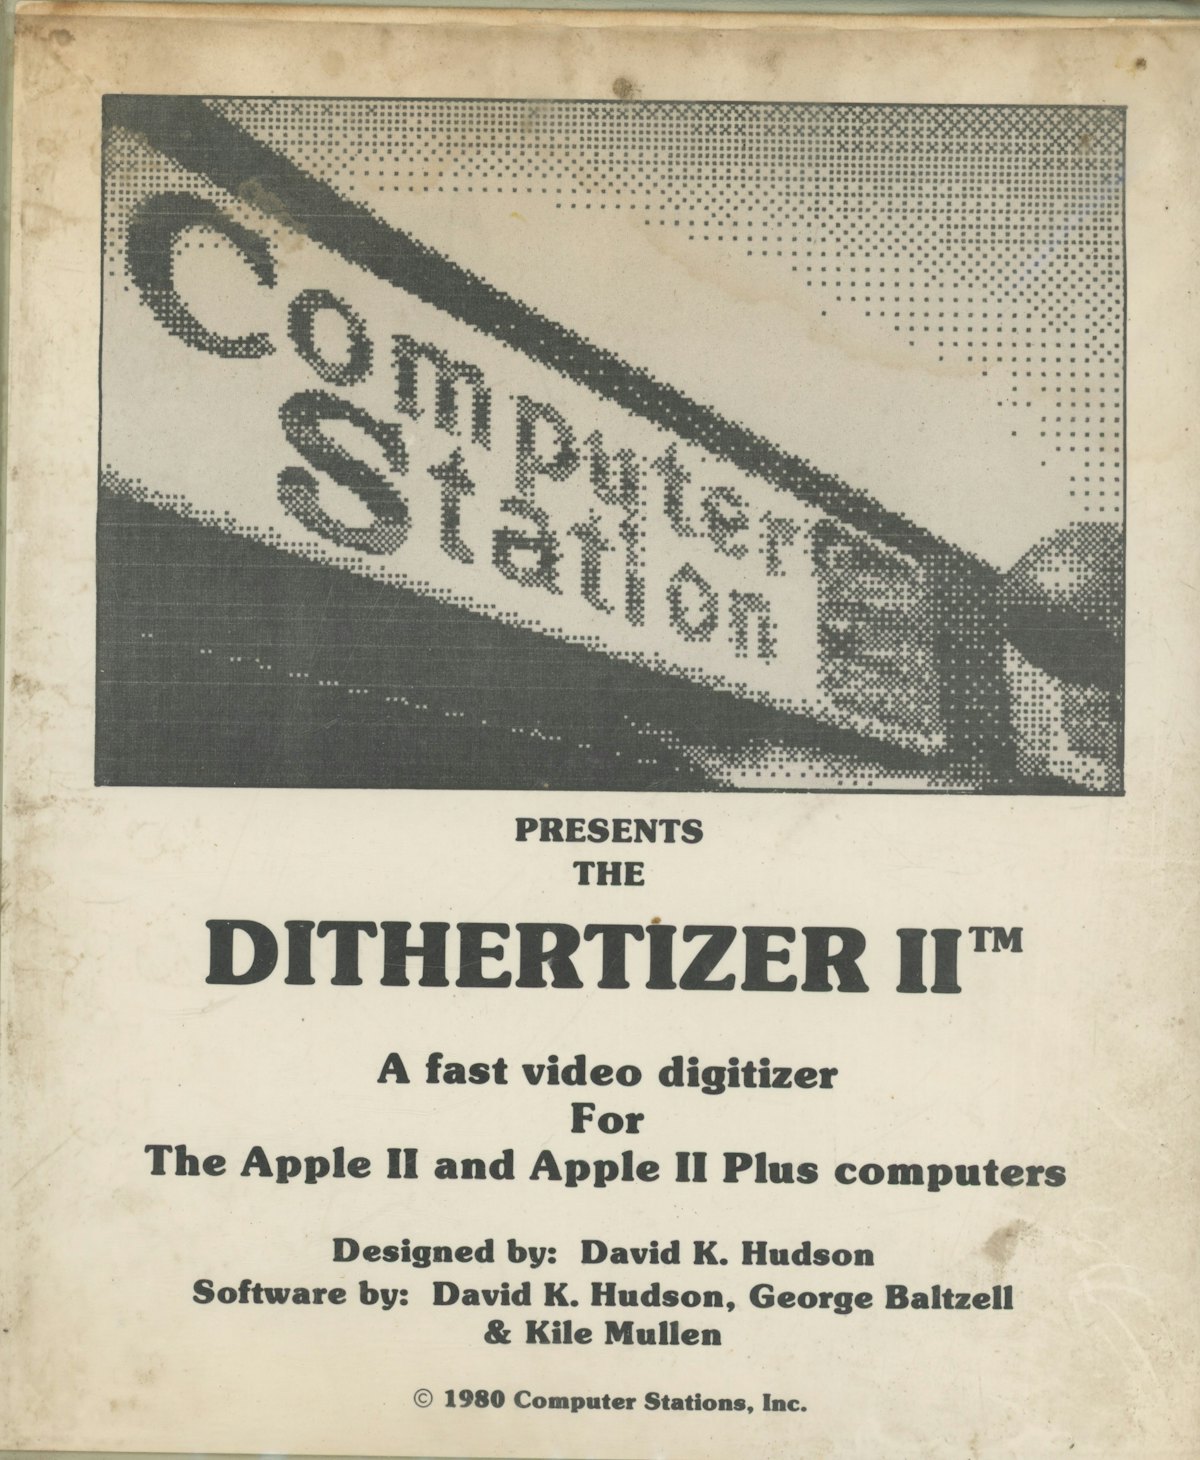 Computer Station Presents the DITHERTIZER II A Fast Video Digitizer For The Apple II and Apple II Plus Computers